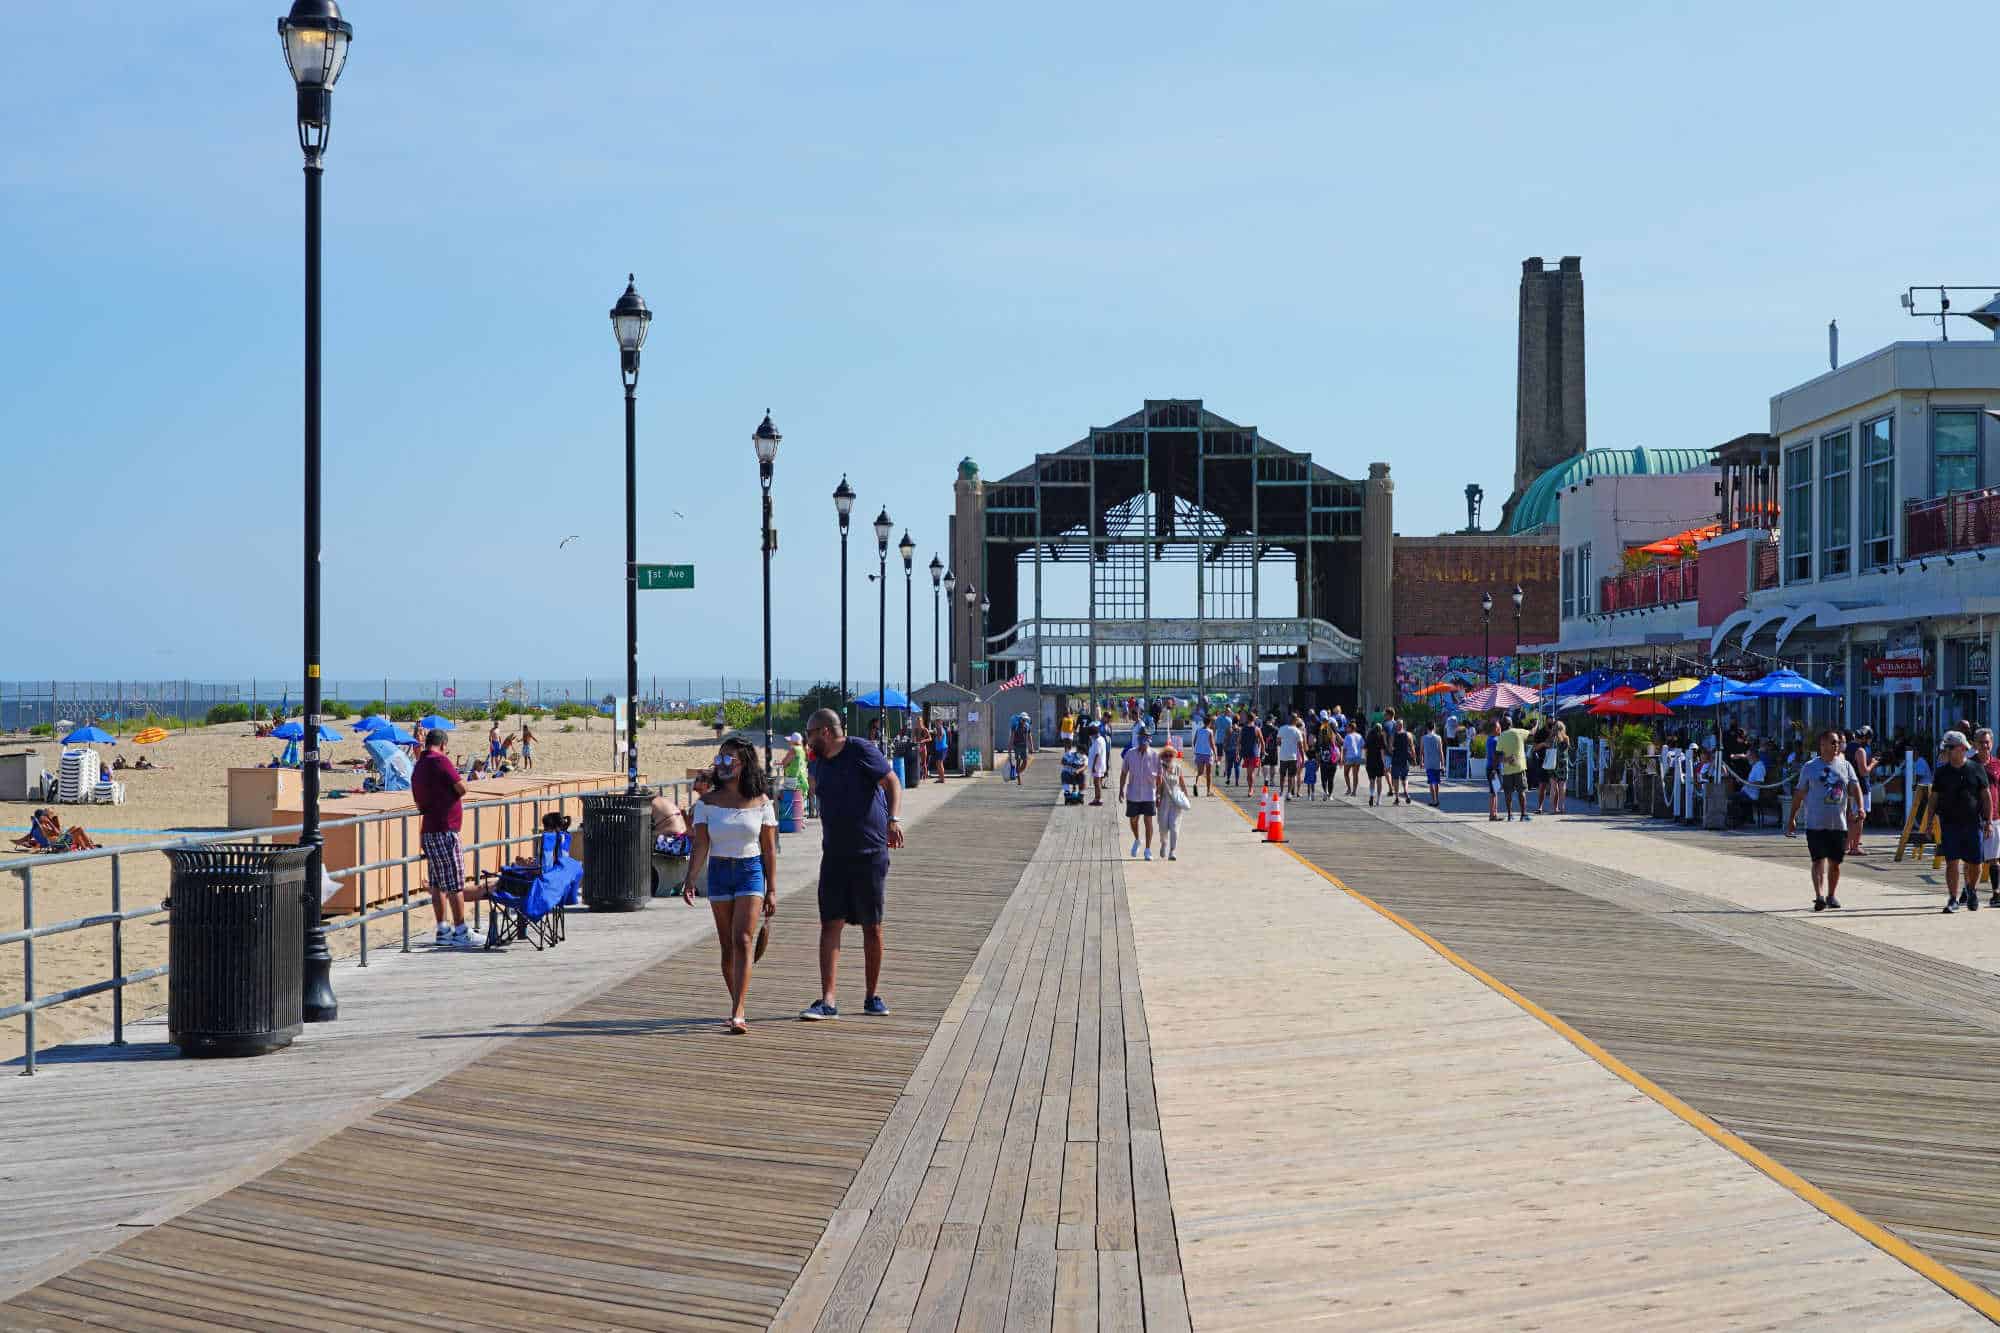 People walking on the Asbury Park Boardwalk between the beach and a row of shops